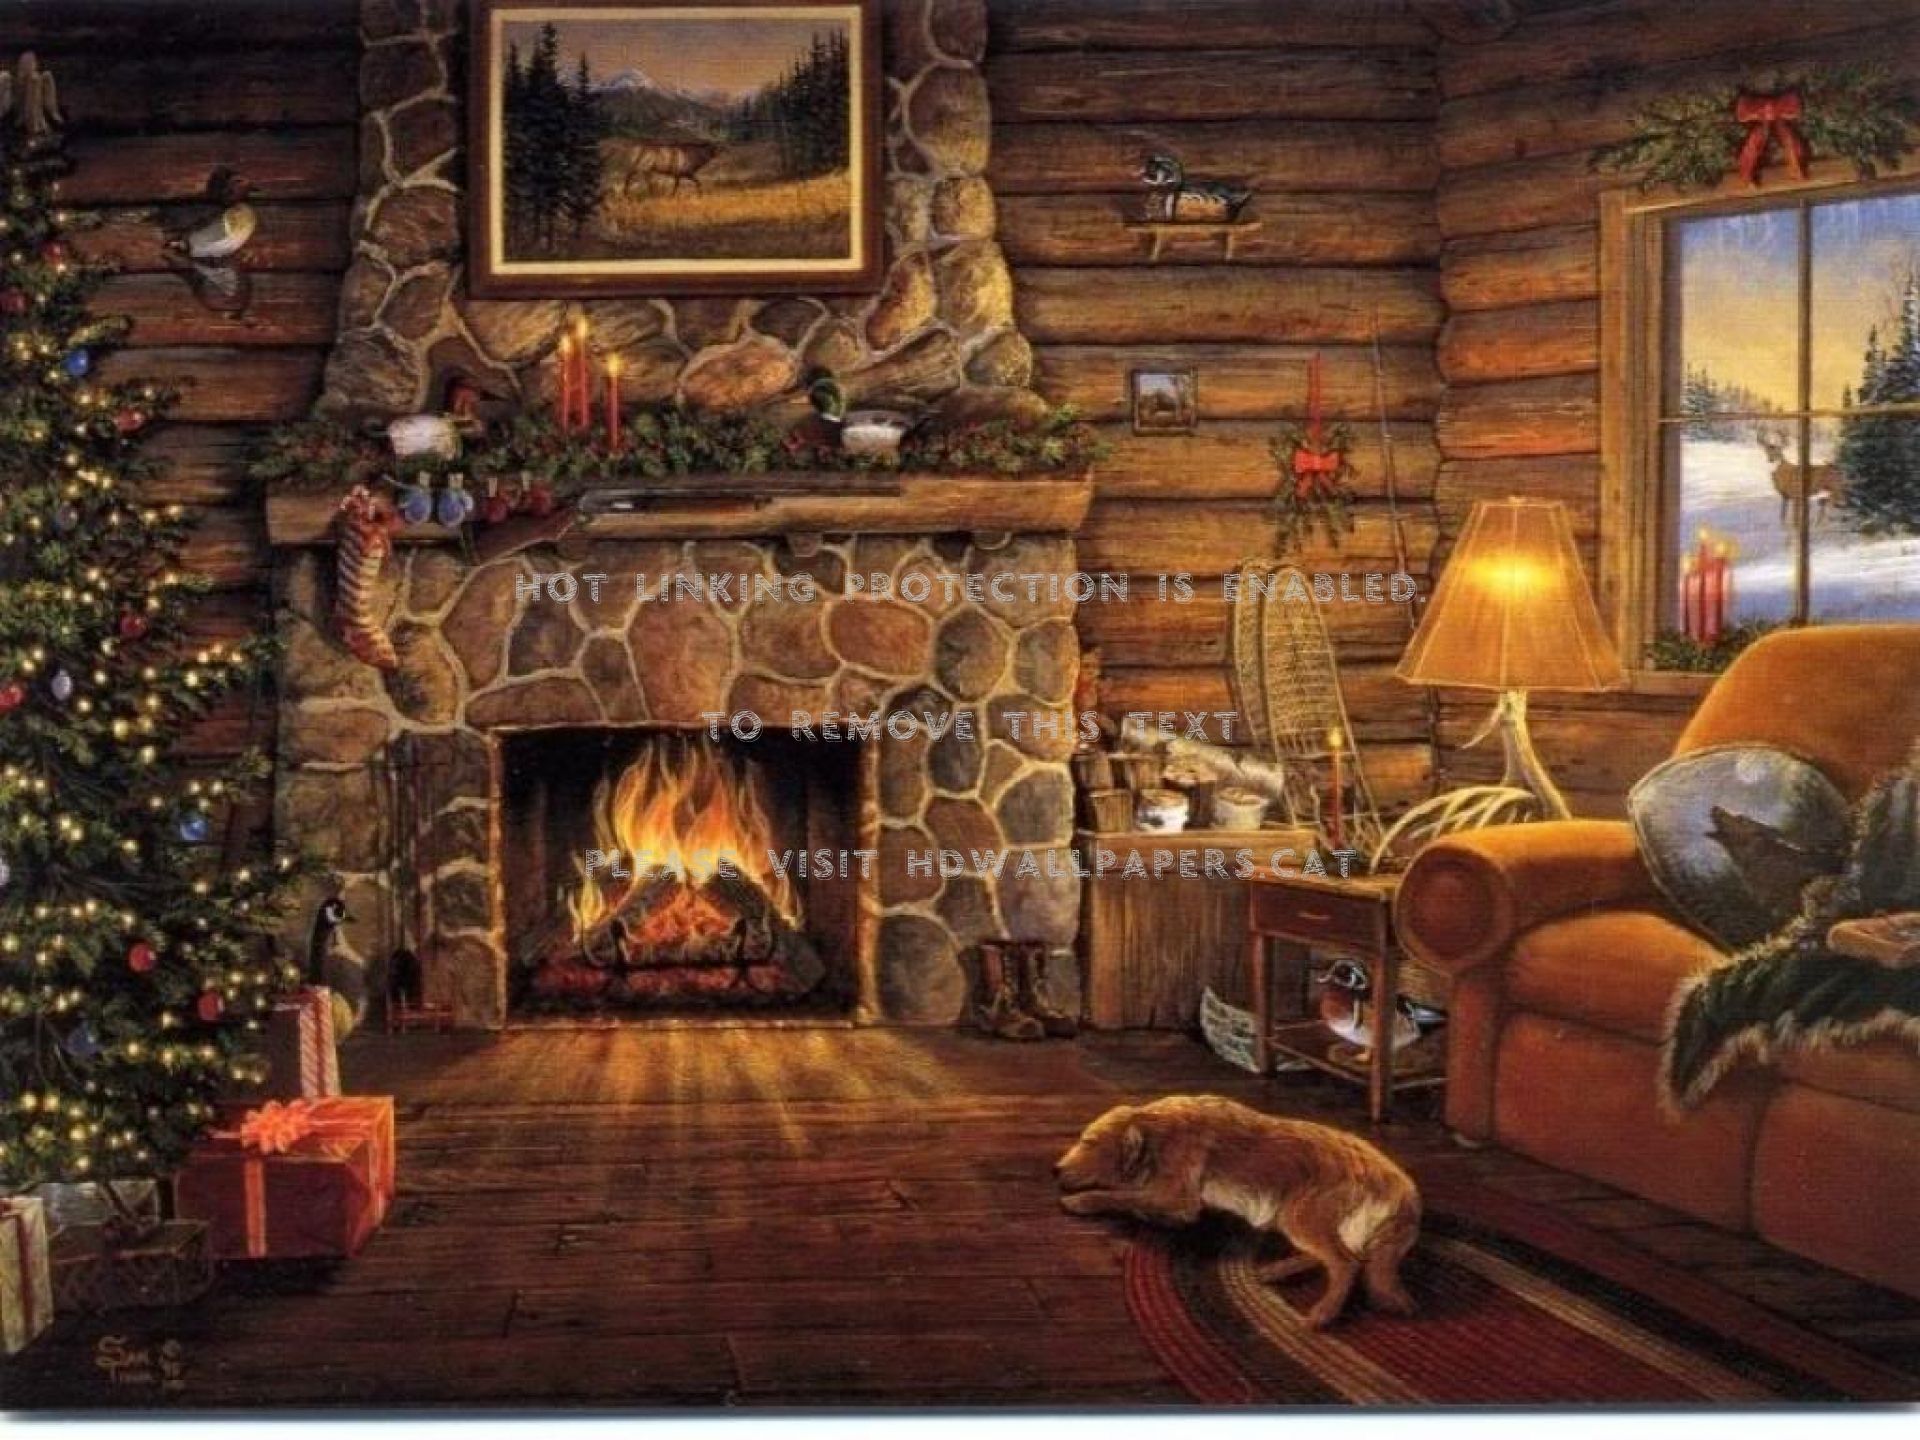 Holiday Log Cabin Fireplace Wallpaper. Fireplace Wallpaper, Christmas Fireplace Wallpaper and Romantic Fireplace Wallpaper